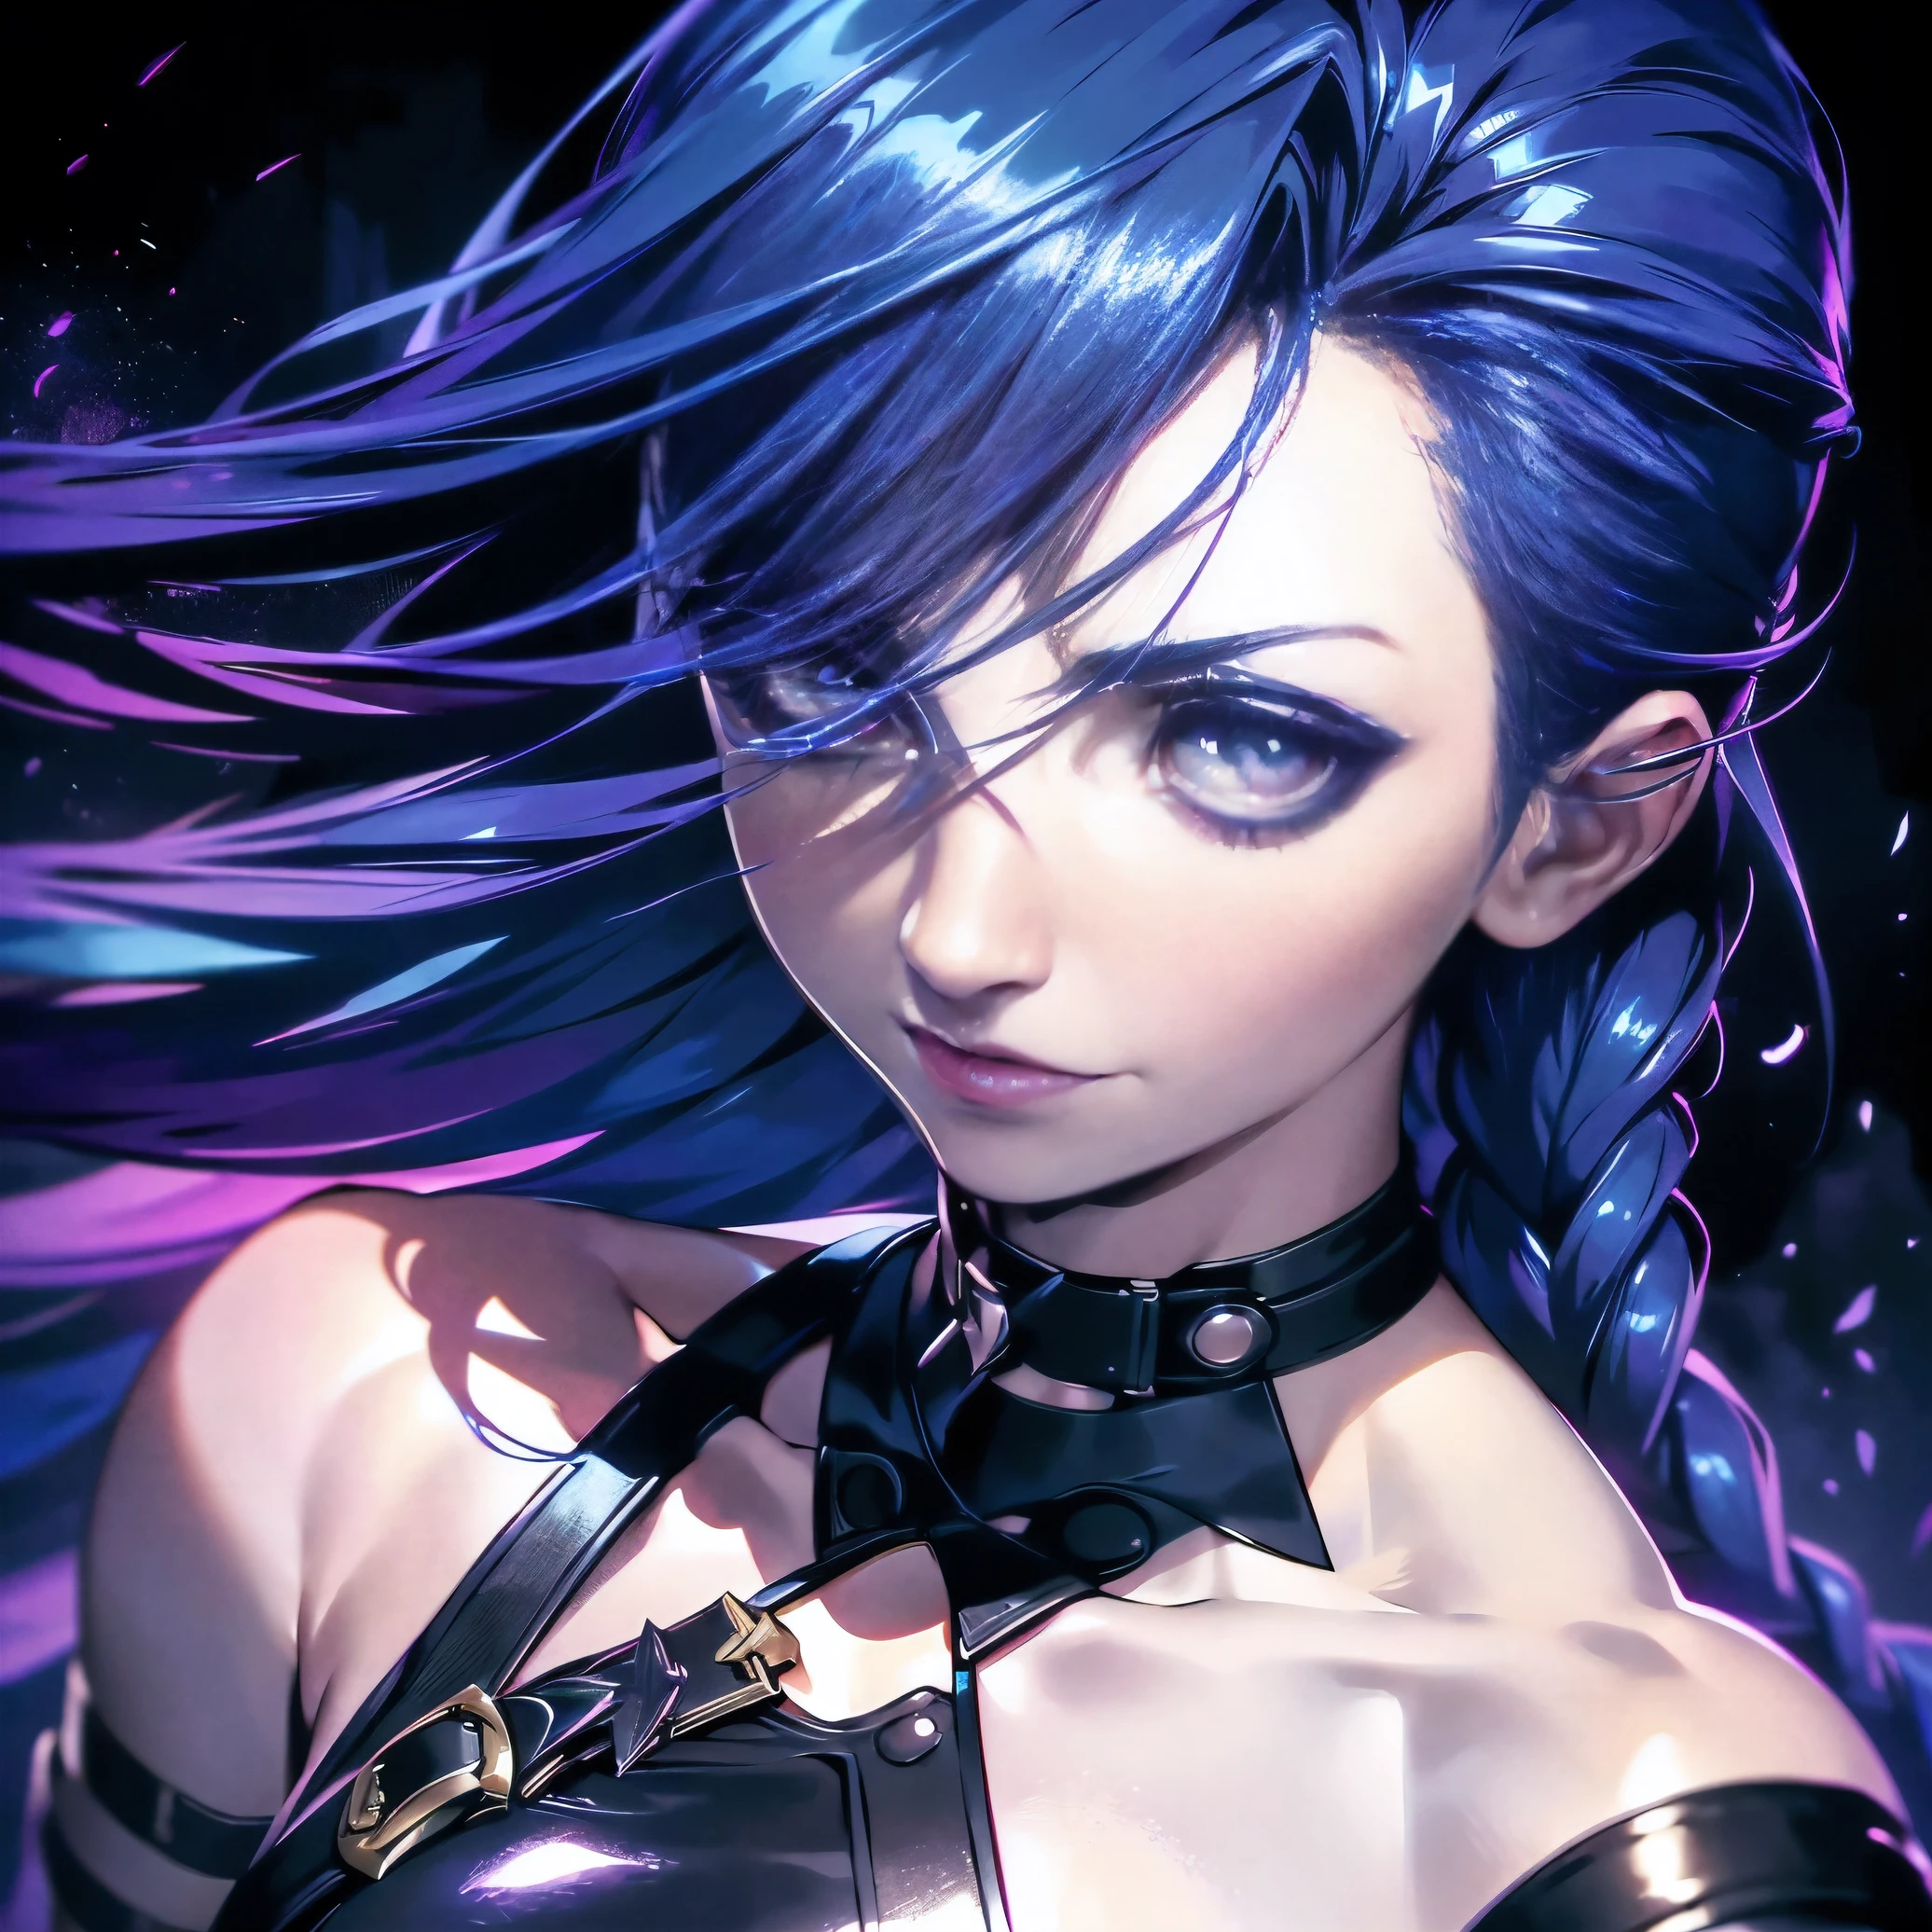 Um ultra-detalhado, high resolution, e realista:1.37 aviso, depicting a mysterious scene inspired by League of Legends champion Jinx. The central focus of the image is a character with his head tilted, olhando para cima com um sorriso estranho. The character&#39;s eyes are exceptionally detailed, radiating a sense of mystery and intensity. The lips are also beautifully detailed, presenting a seductive expression, mas sinistra. The overall atmosphere is dark and mysterious, with shadows and low lighting increasing the mysterious atmosphere. Image quality is top-notch, With intricate detail and sharp focus. O estilo de arte inclina-se para a arte conceitual, misturando elementos de fantasia com um toque de realismo. The color palette is predominantly dark and moody, with vibrant pops of color used to highlight specific areas. Lighting is positioned to create dramatic effects, casting shadows and lighting the scene with an eerie glow.